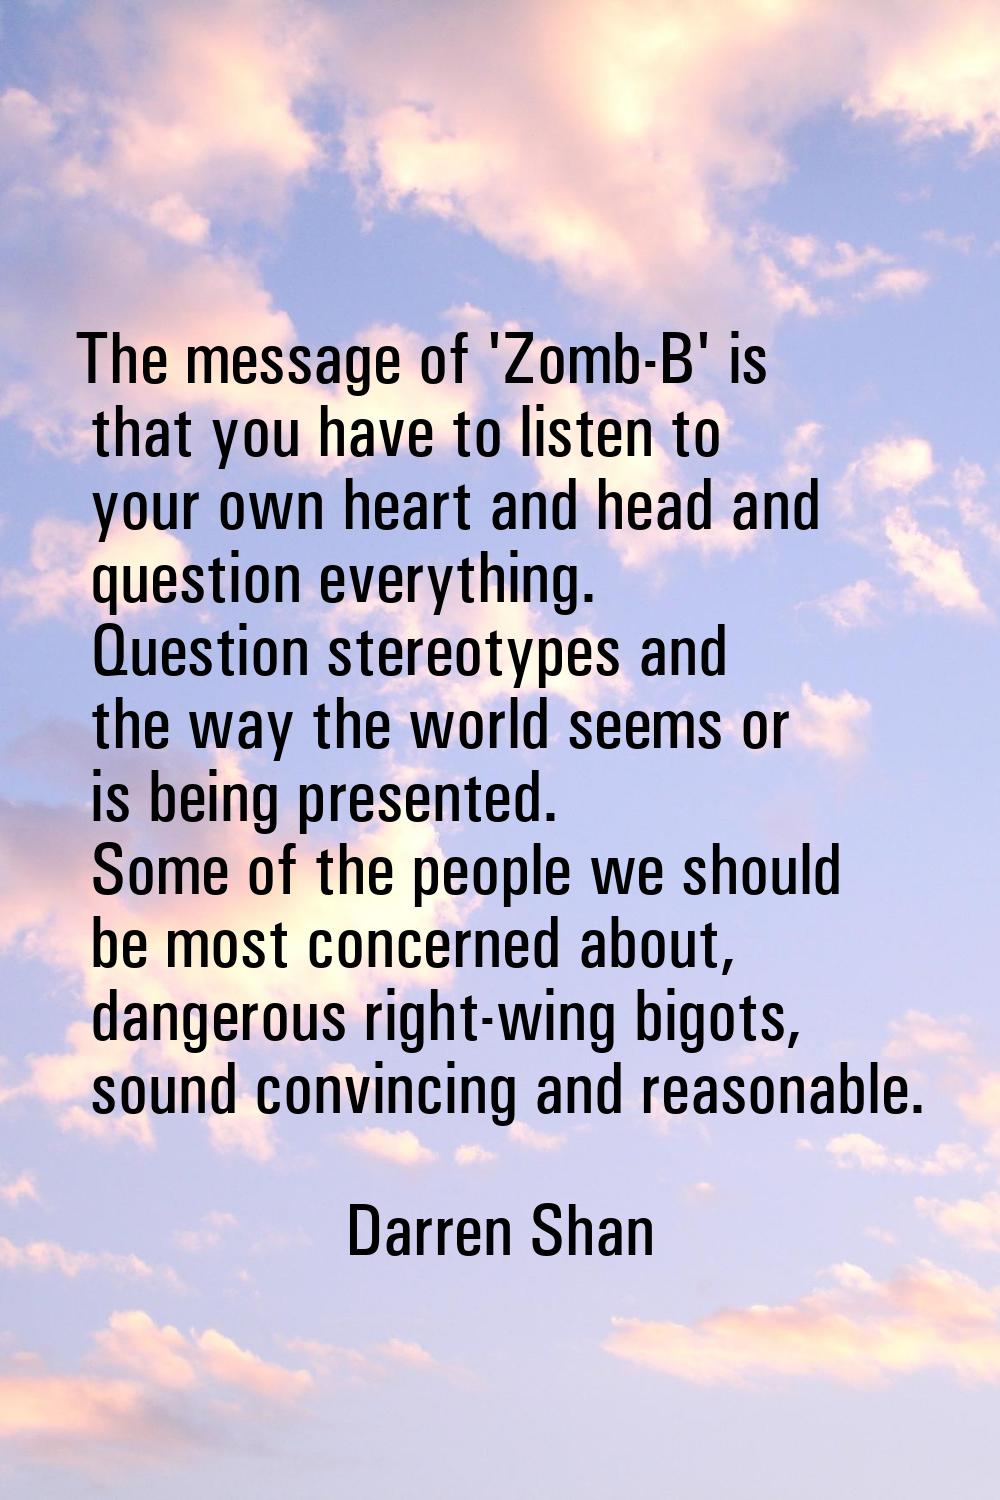 The message of 'Zomb-B' is that you have to listen to your own heart and head and question everythi